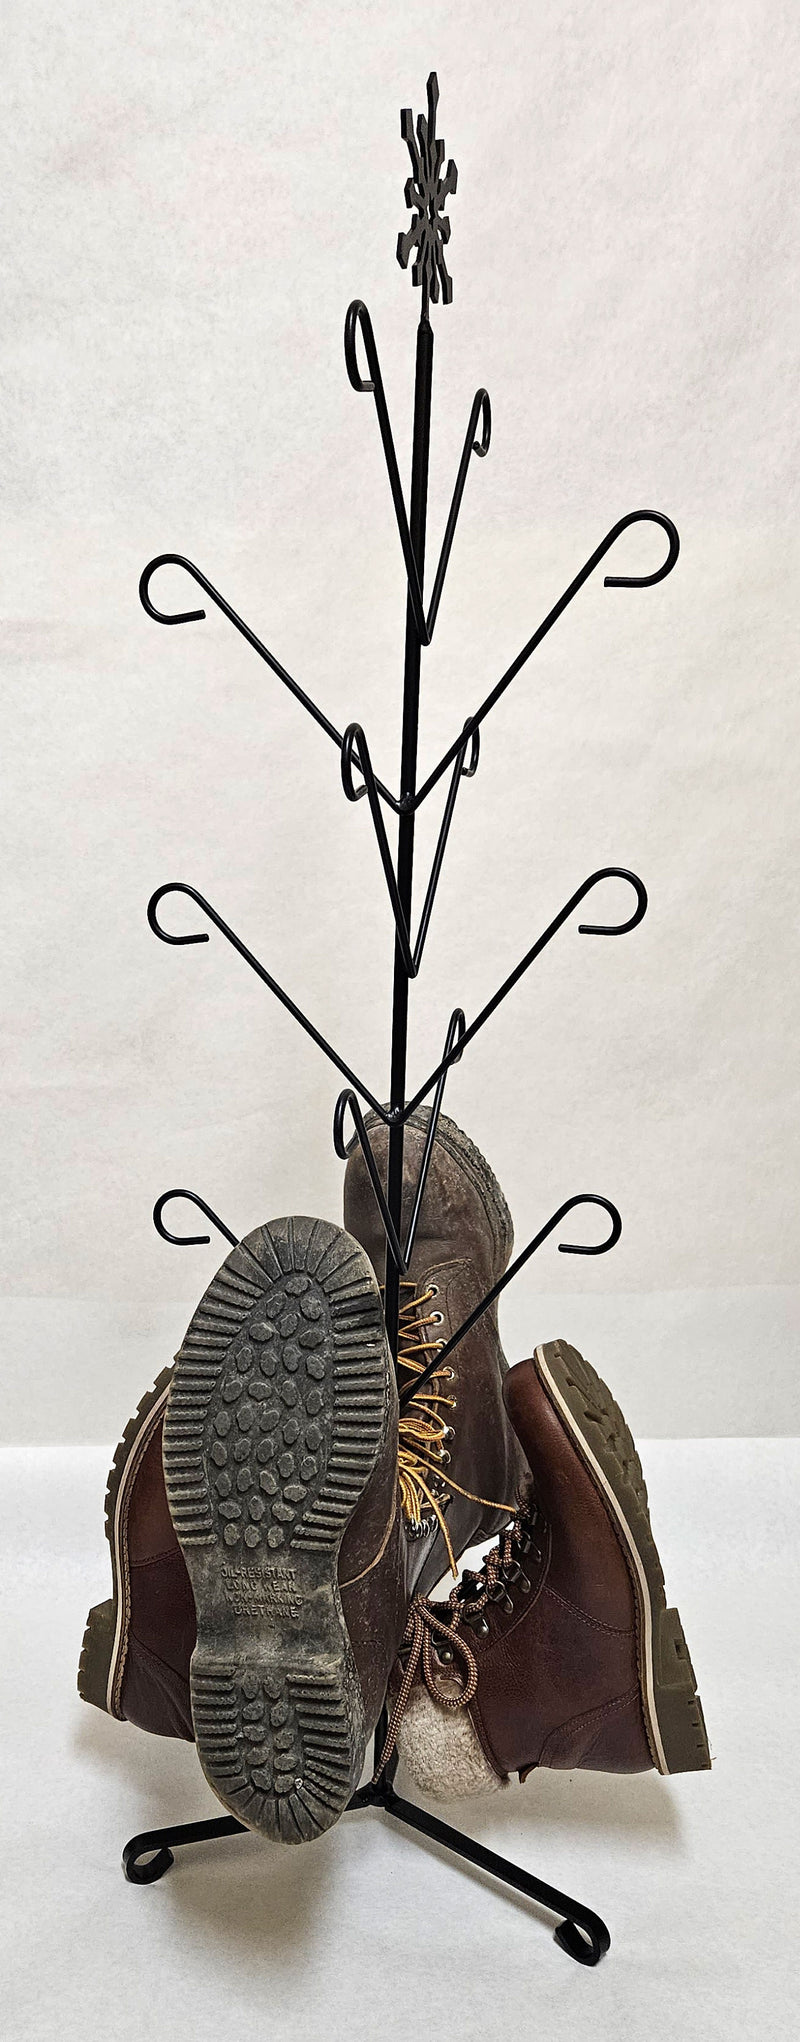 Wrought Iron Snowflake Top 8 Pair Mitten & Boot Dryer Stand